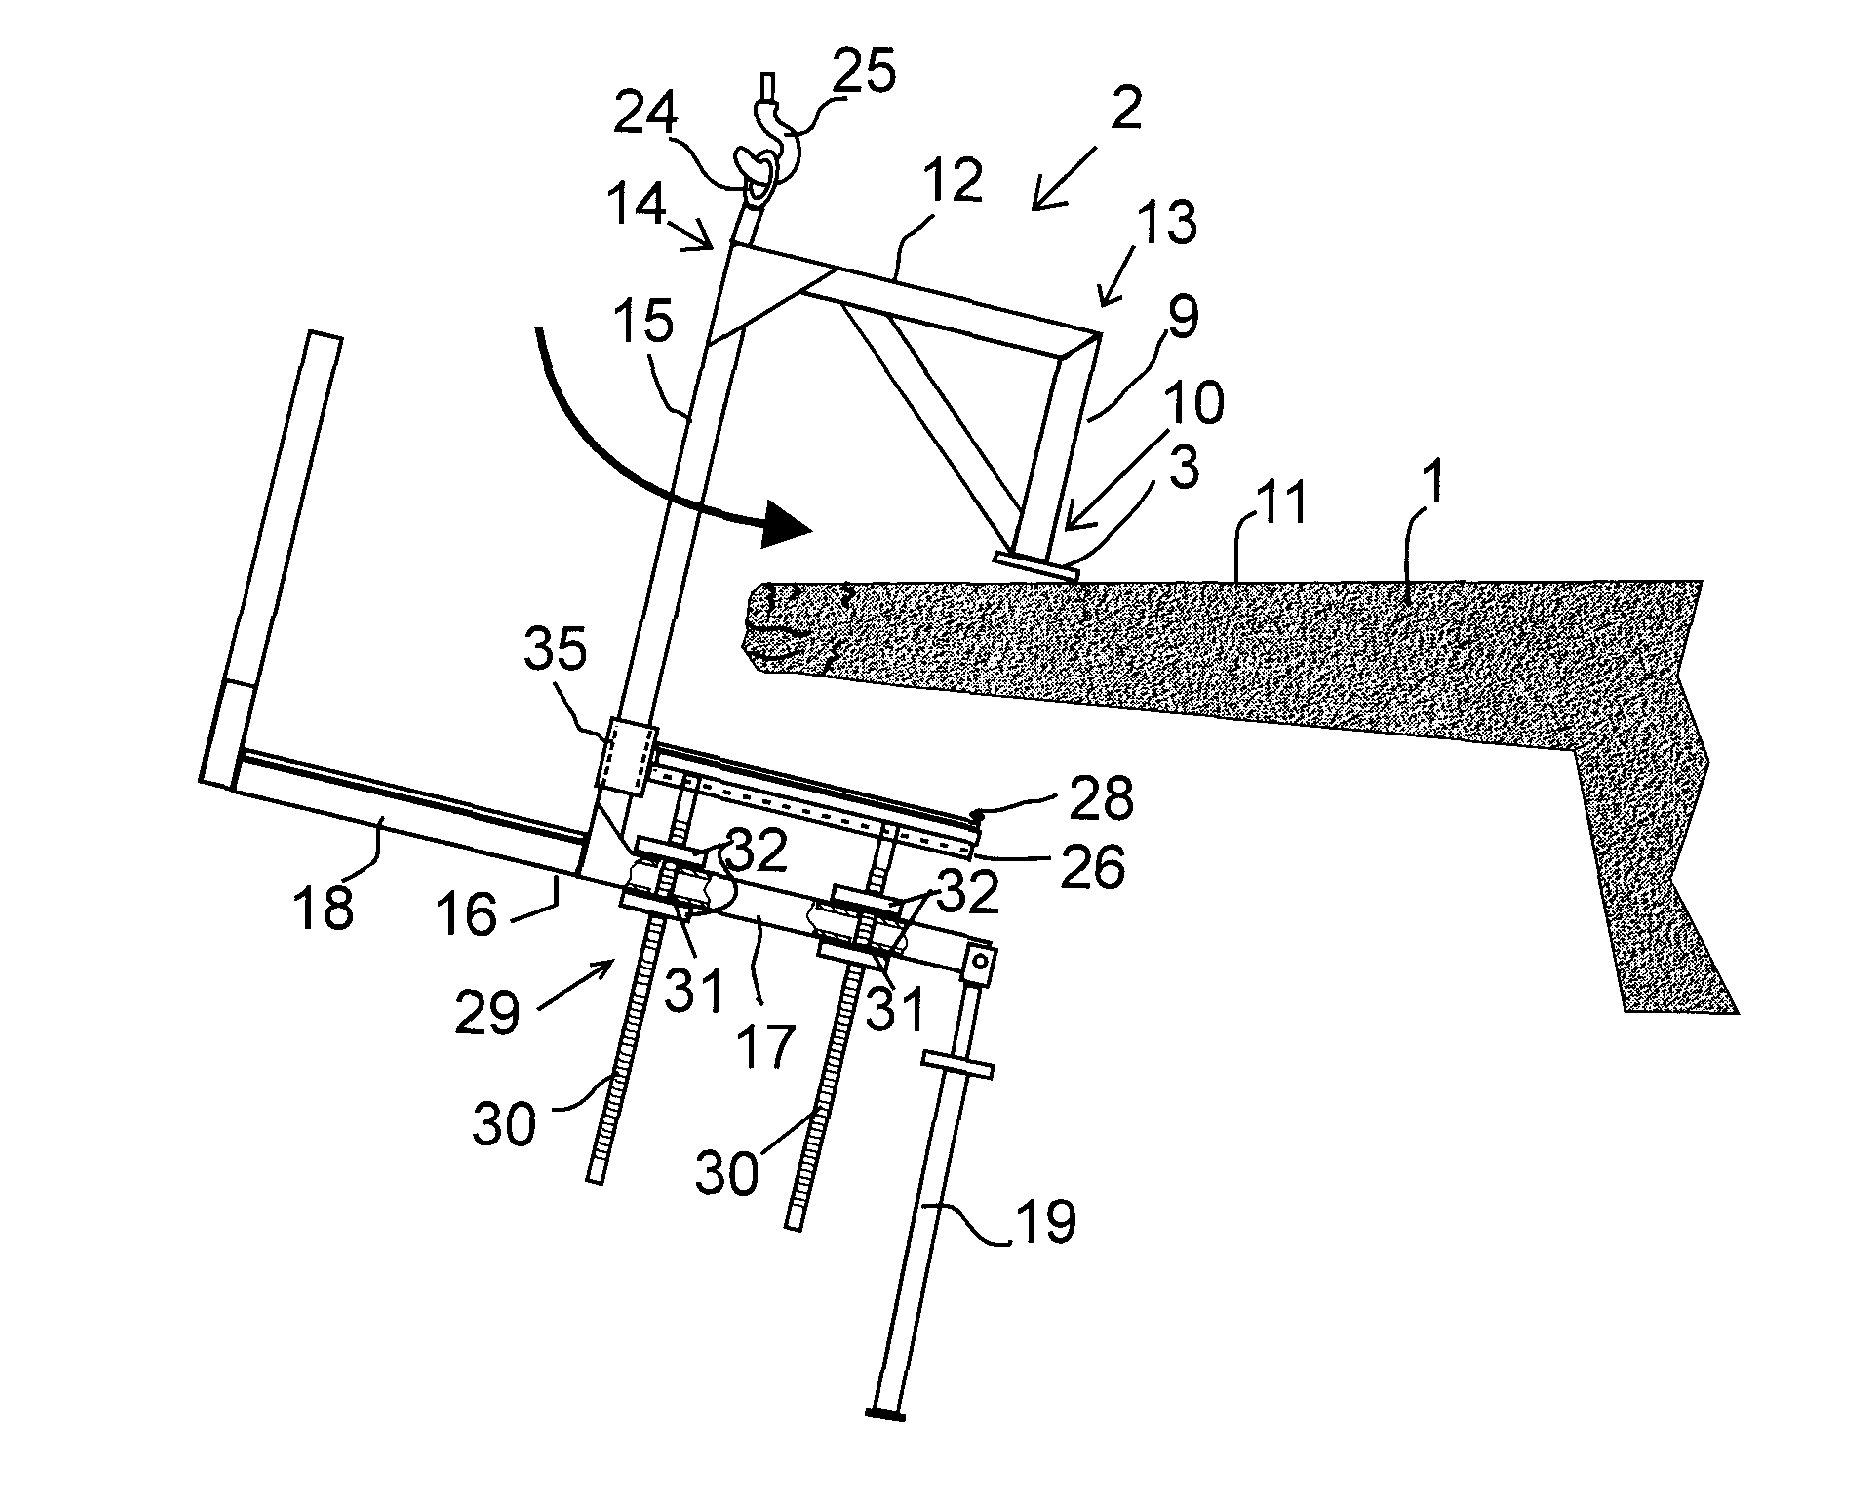 Scaffold Arrangement and Method for Repairing the Edge Structure of a Concrete Bridge